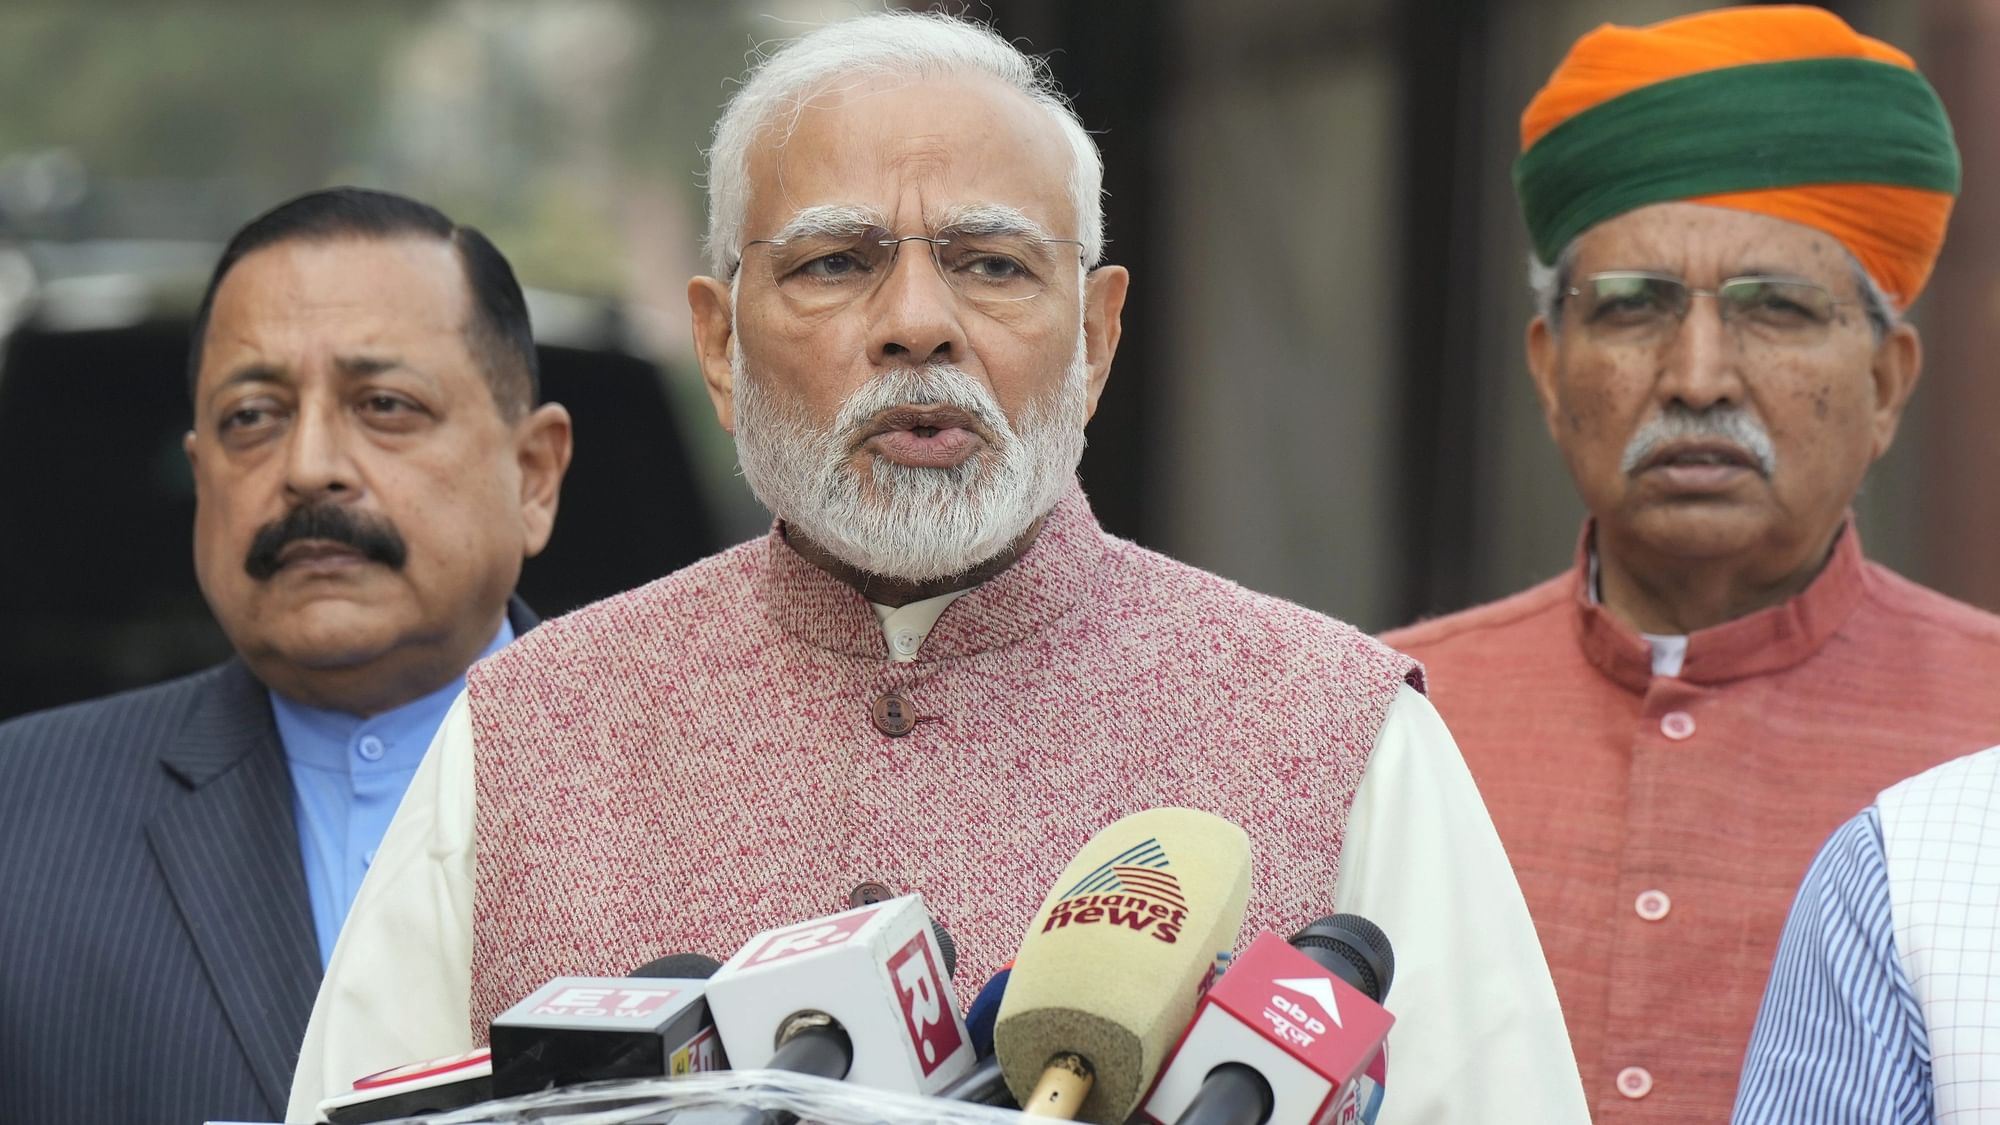 <div class="paragraphs"><p>New Delhi: Prime Minister Narendra Modi addresses the media at Parliament complex on the first day of the Winter Session, in New Delhi, Wednesday, December 7, 2022. Ministers of State Jitendra Singh and Arjun Ram Meghwal are also seen. </p></div>